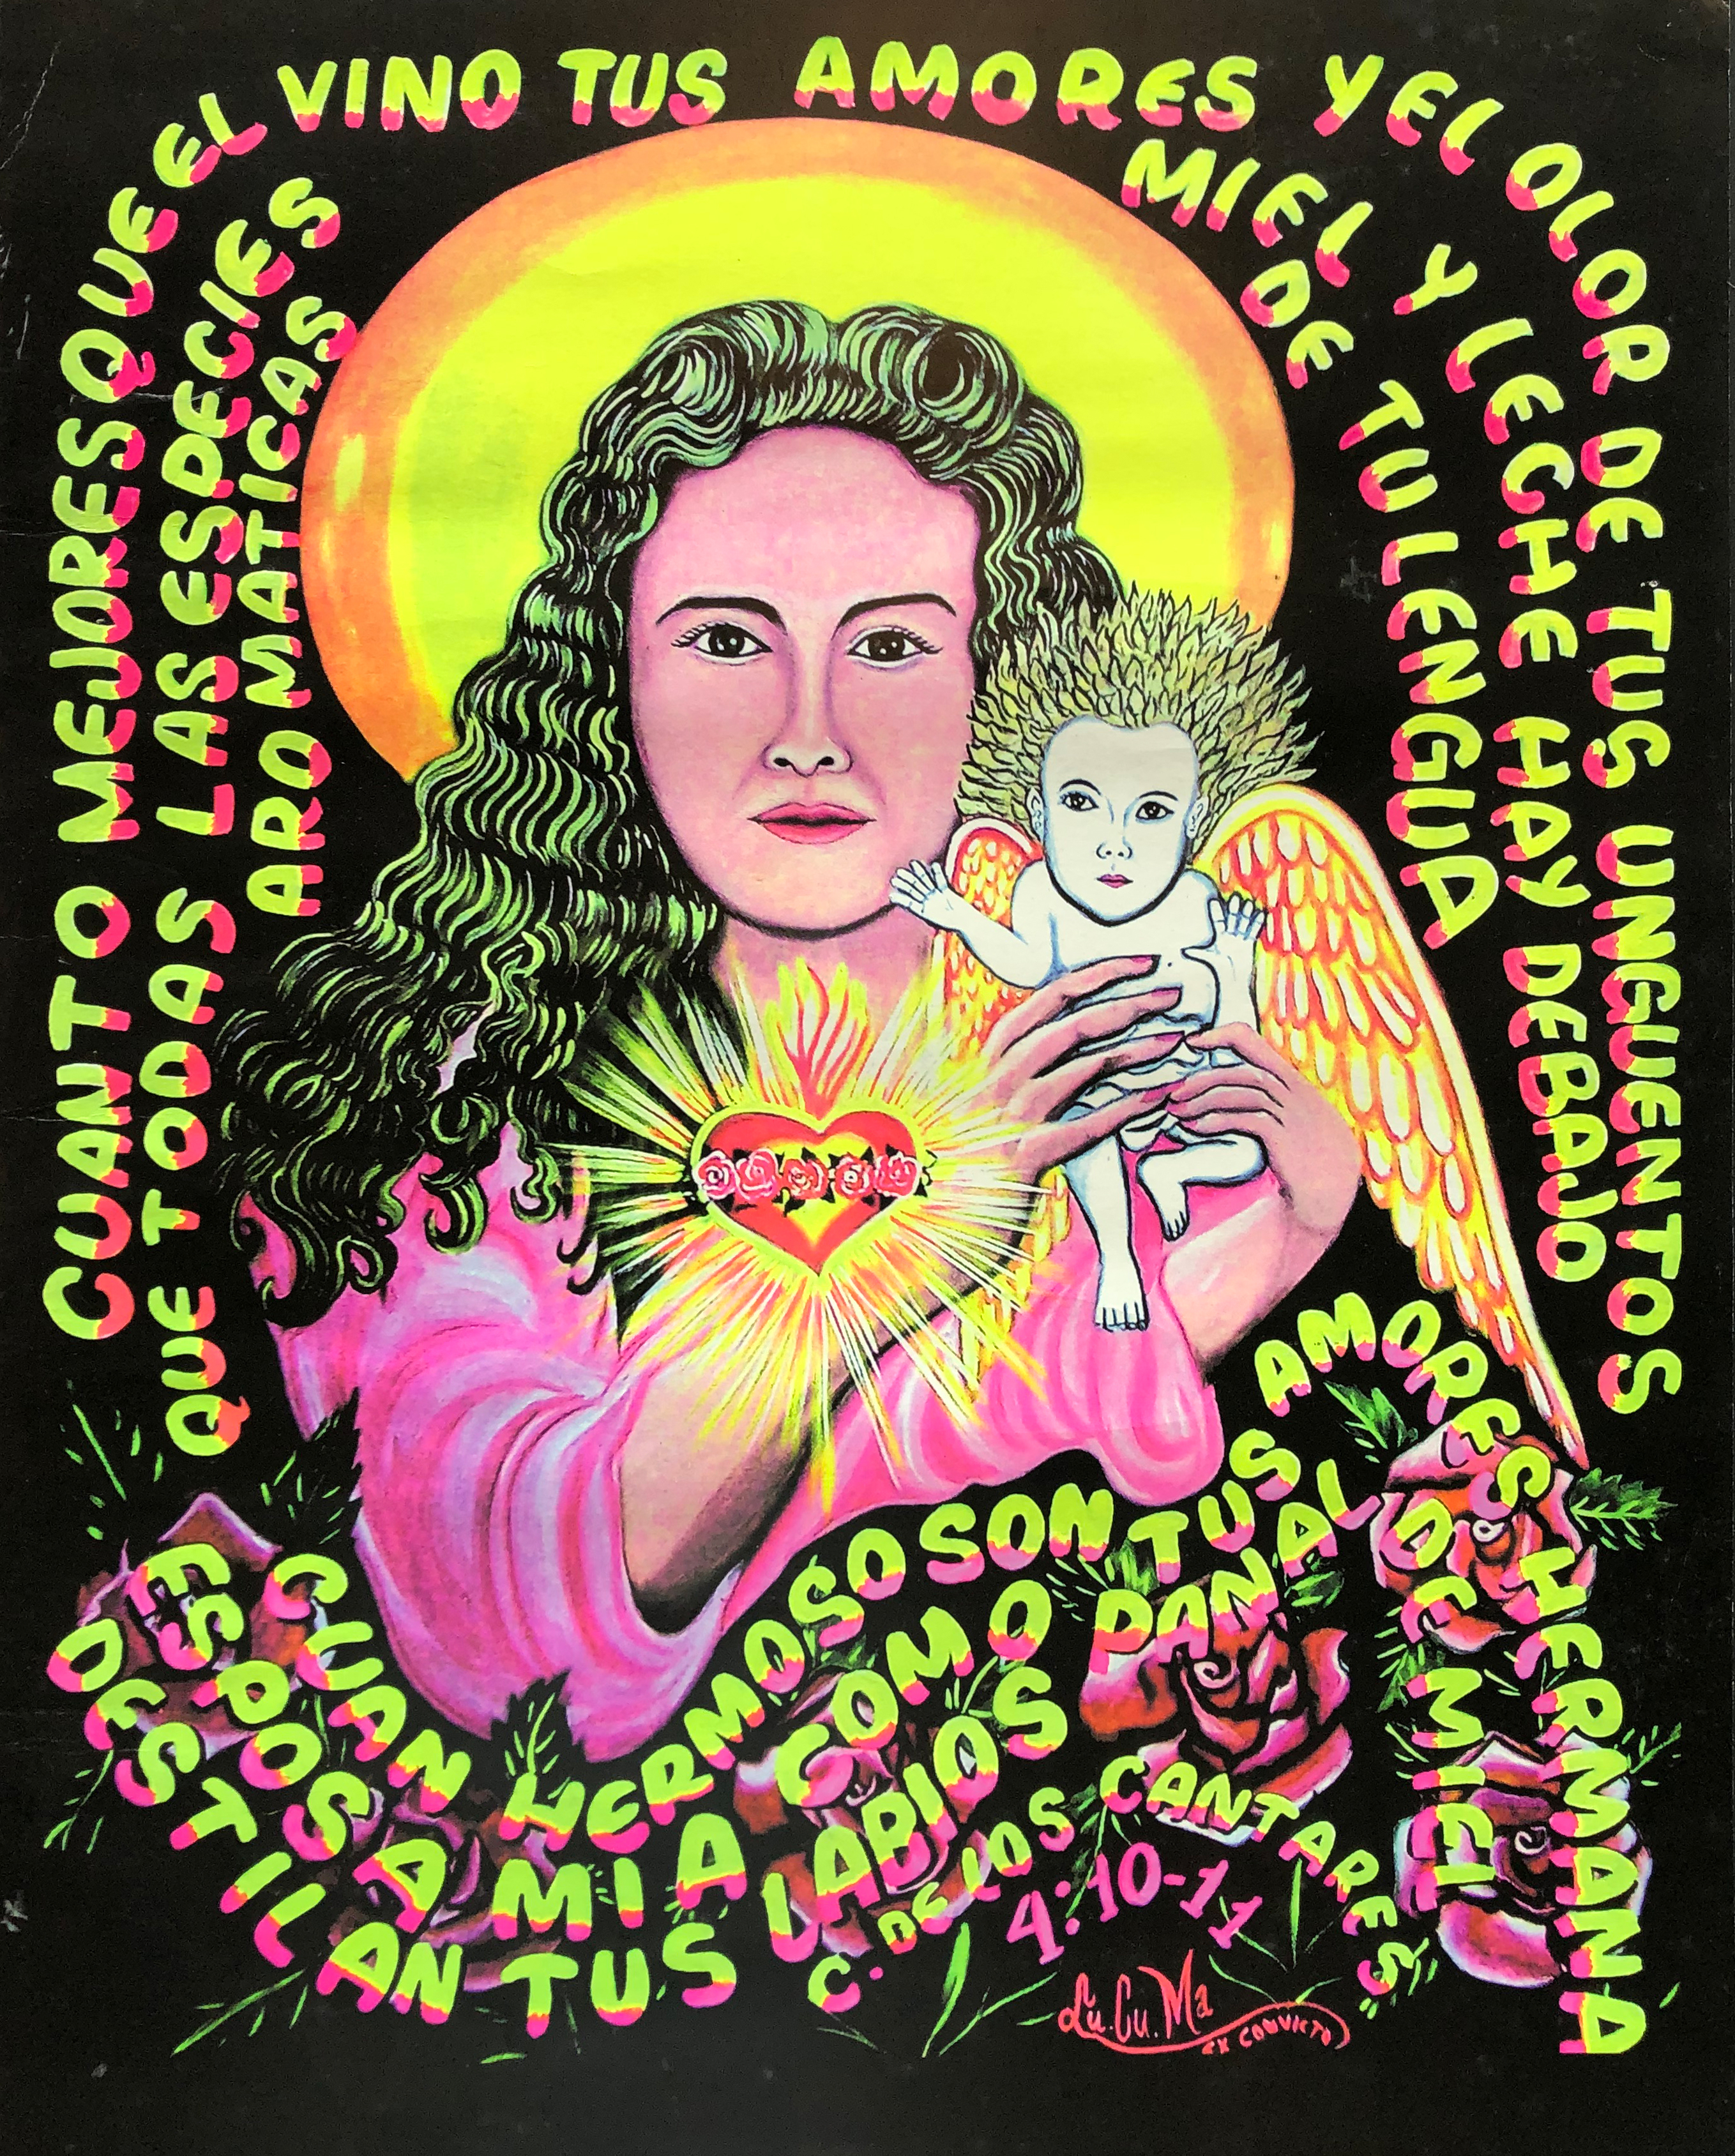 black poster with painted illustration of figure with halo and bleeding heart holding small angelic figure surrounded by bible verse